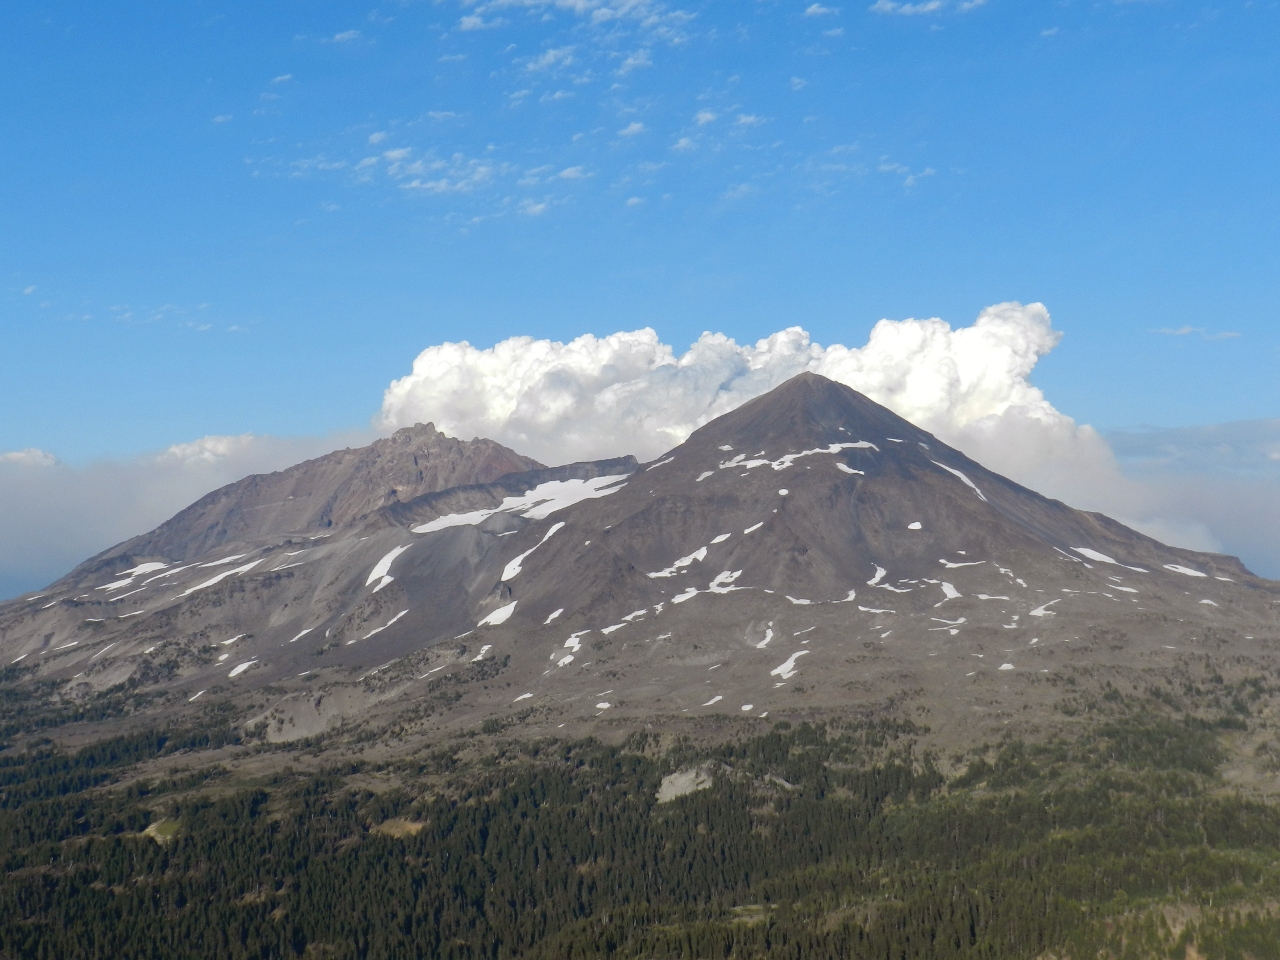 North and Middle Sisters, the Pole Creek fire was raging on the other side